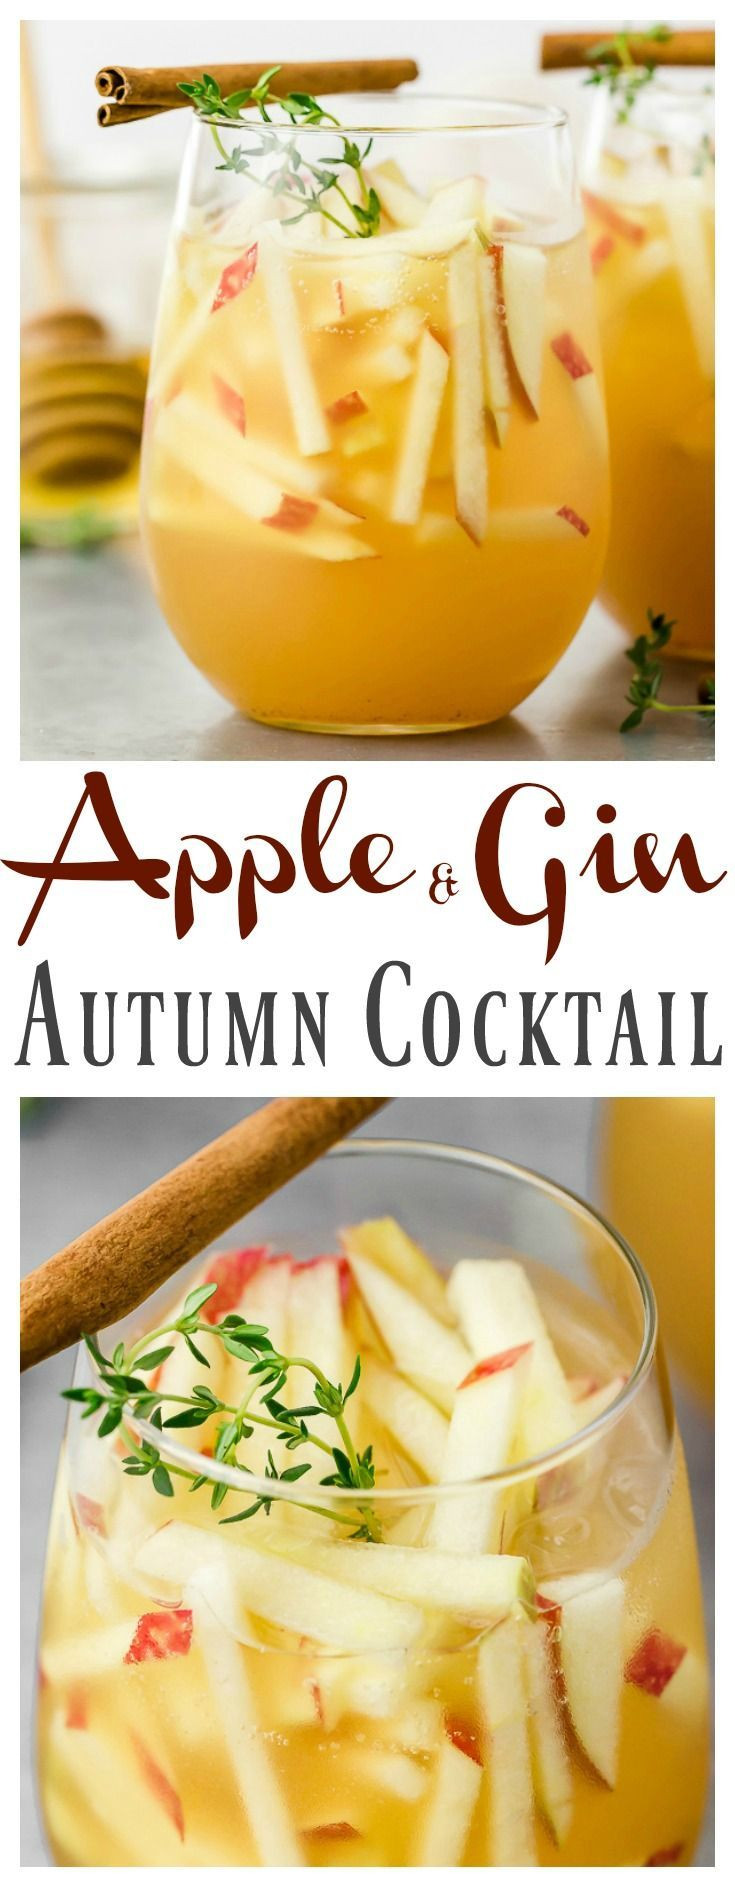 Fall Gin Drinks
 Apple & Gin Autumn Cocktail [with recipe video]